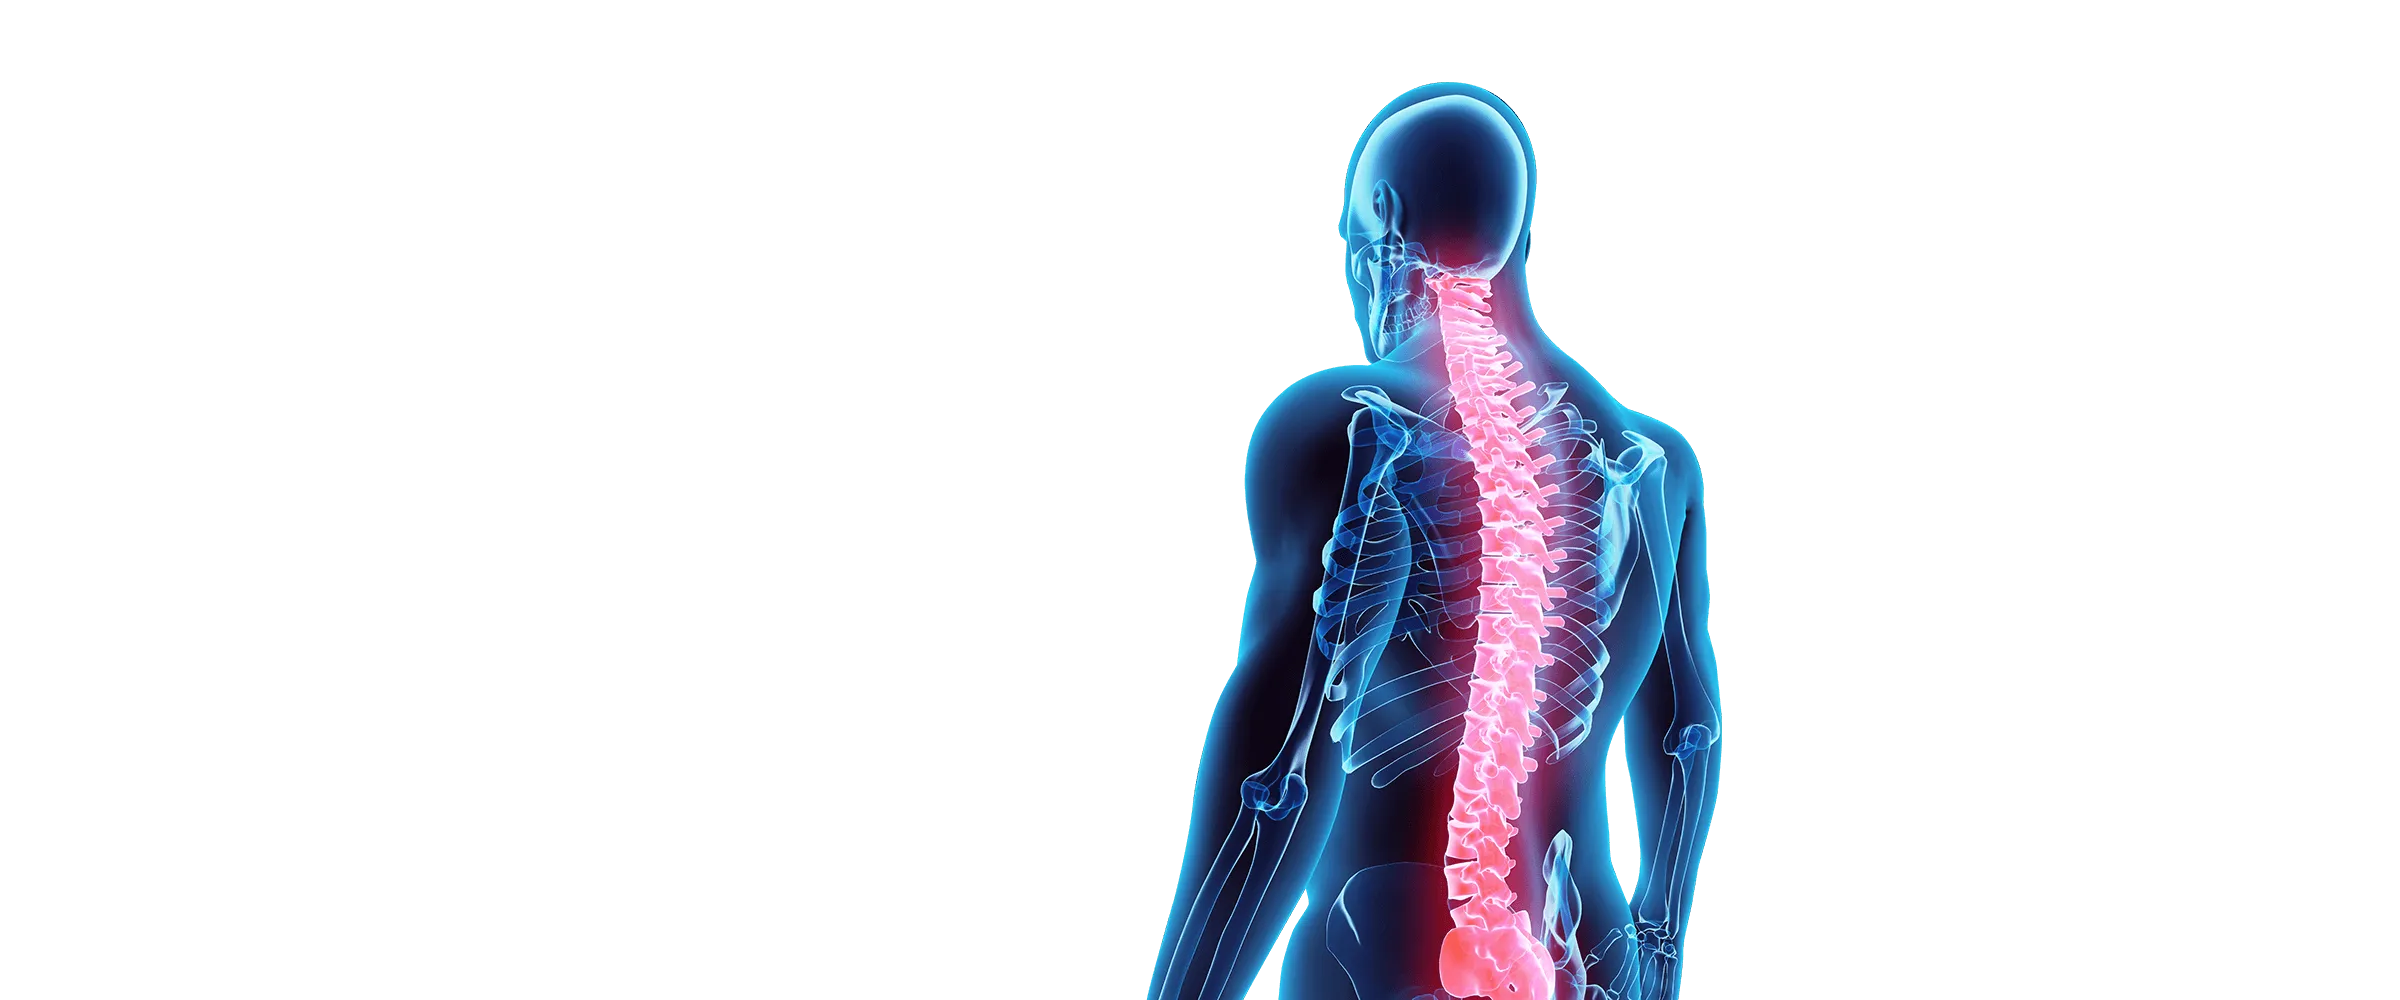 Upper Back Pain - Can Chiropractic Care Help? - Wolke Chiropractic &  Rehabilitation